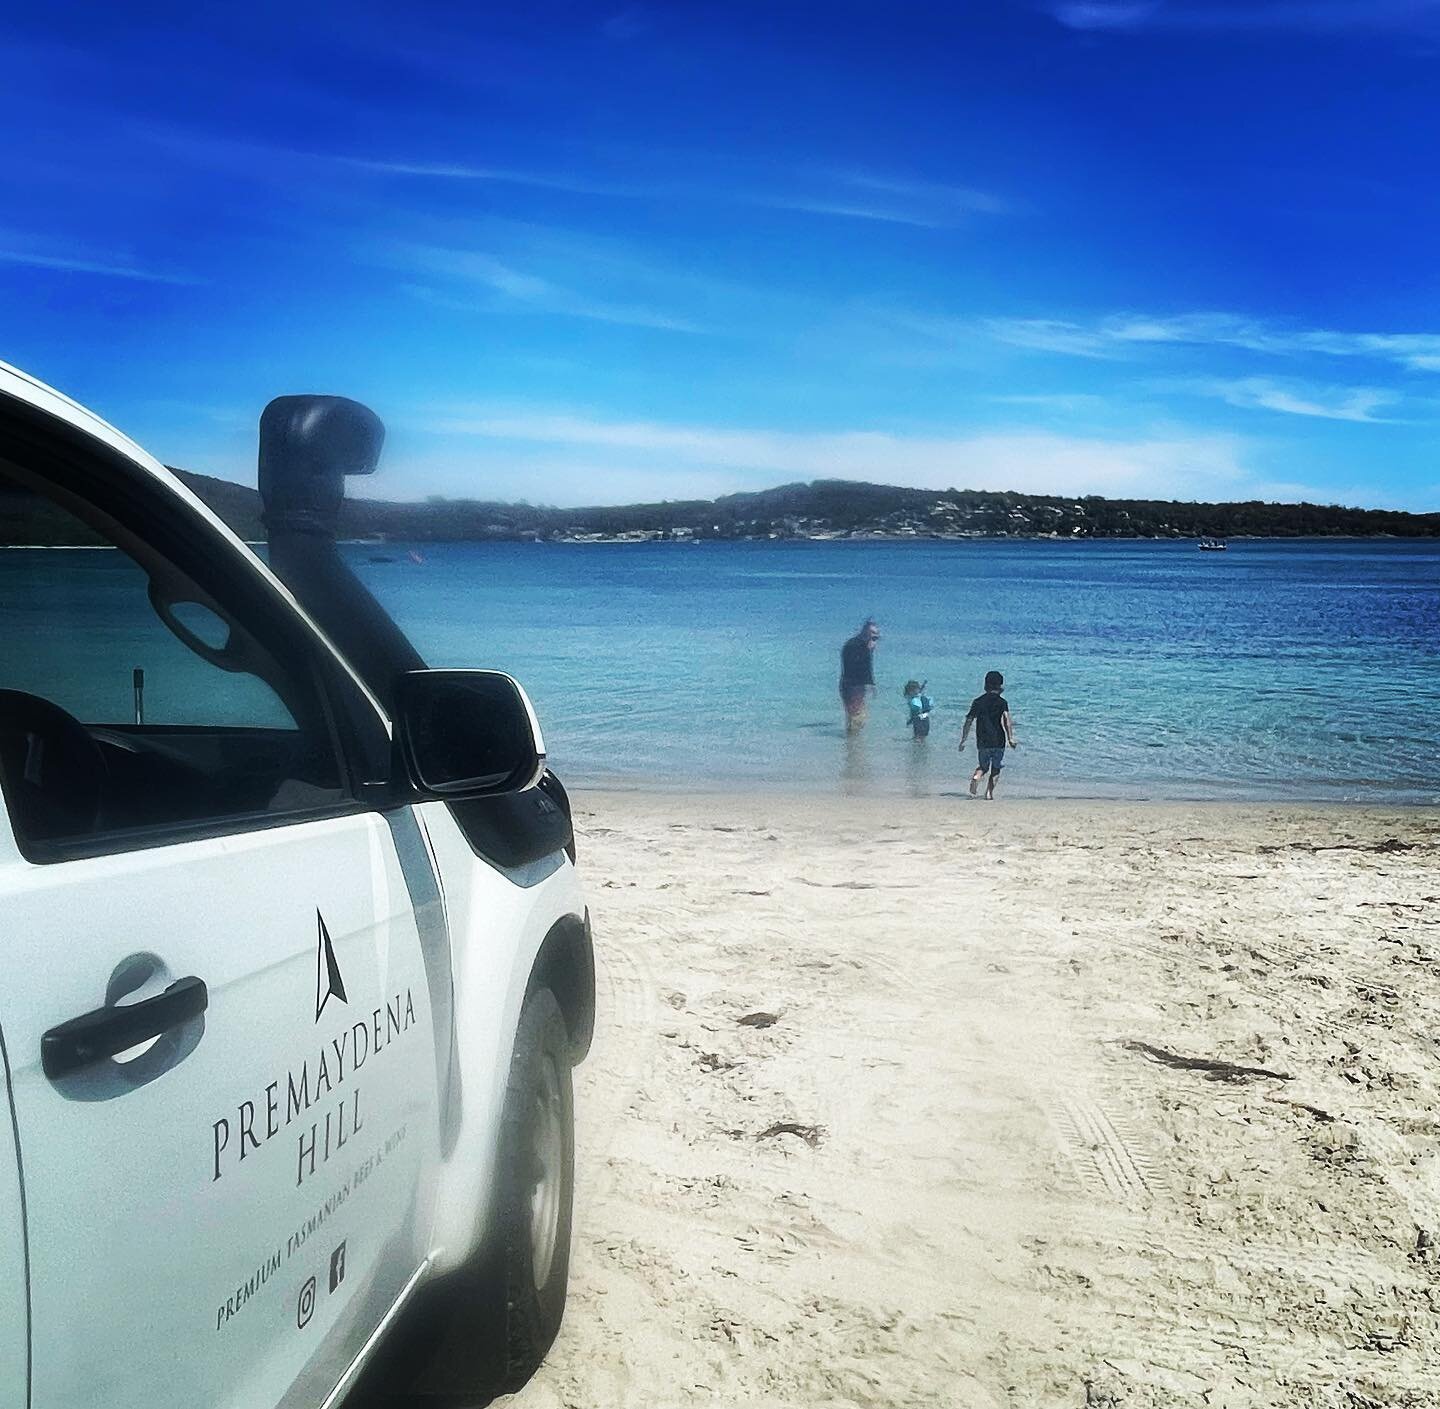 At this time of year we&rsquo;re working in the vineyard seven days a week -  but it&rsquo;s not so bad when your lunch break looks like this!

#tasmanpeninsula #whitebeach #lunchtimeswim #workhardplayhard #tassiesummer